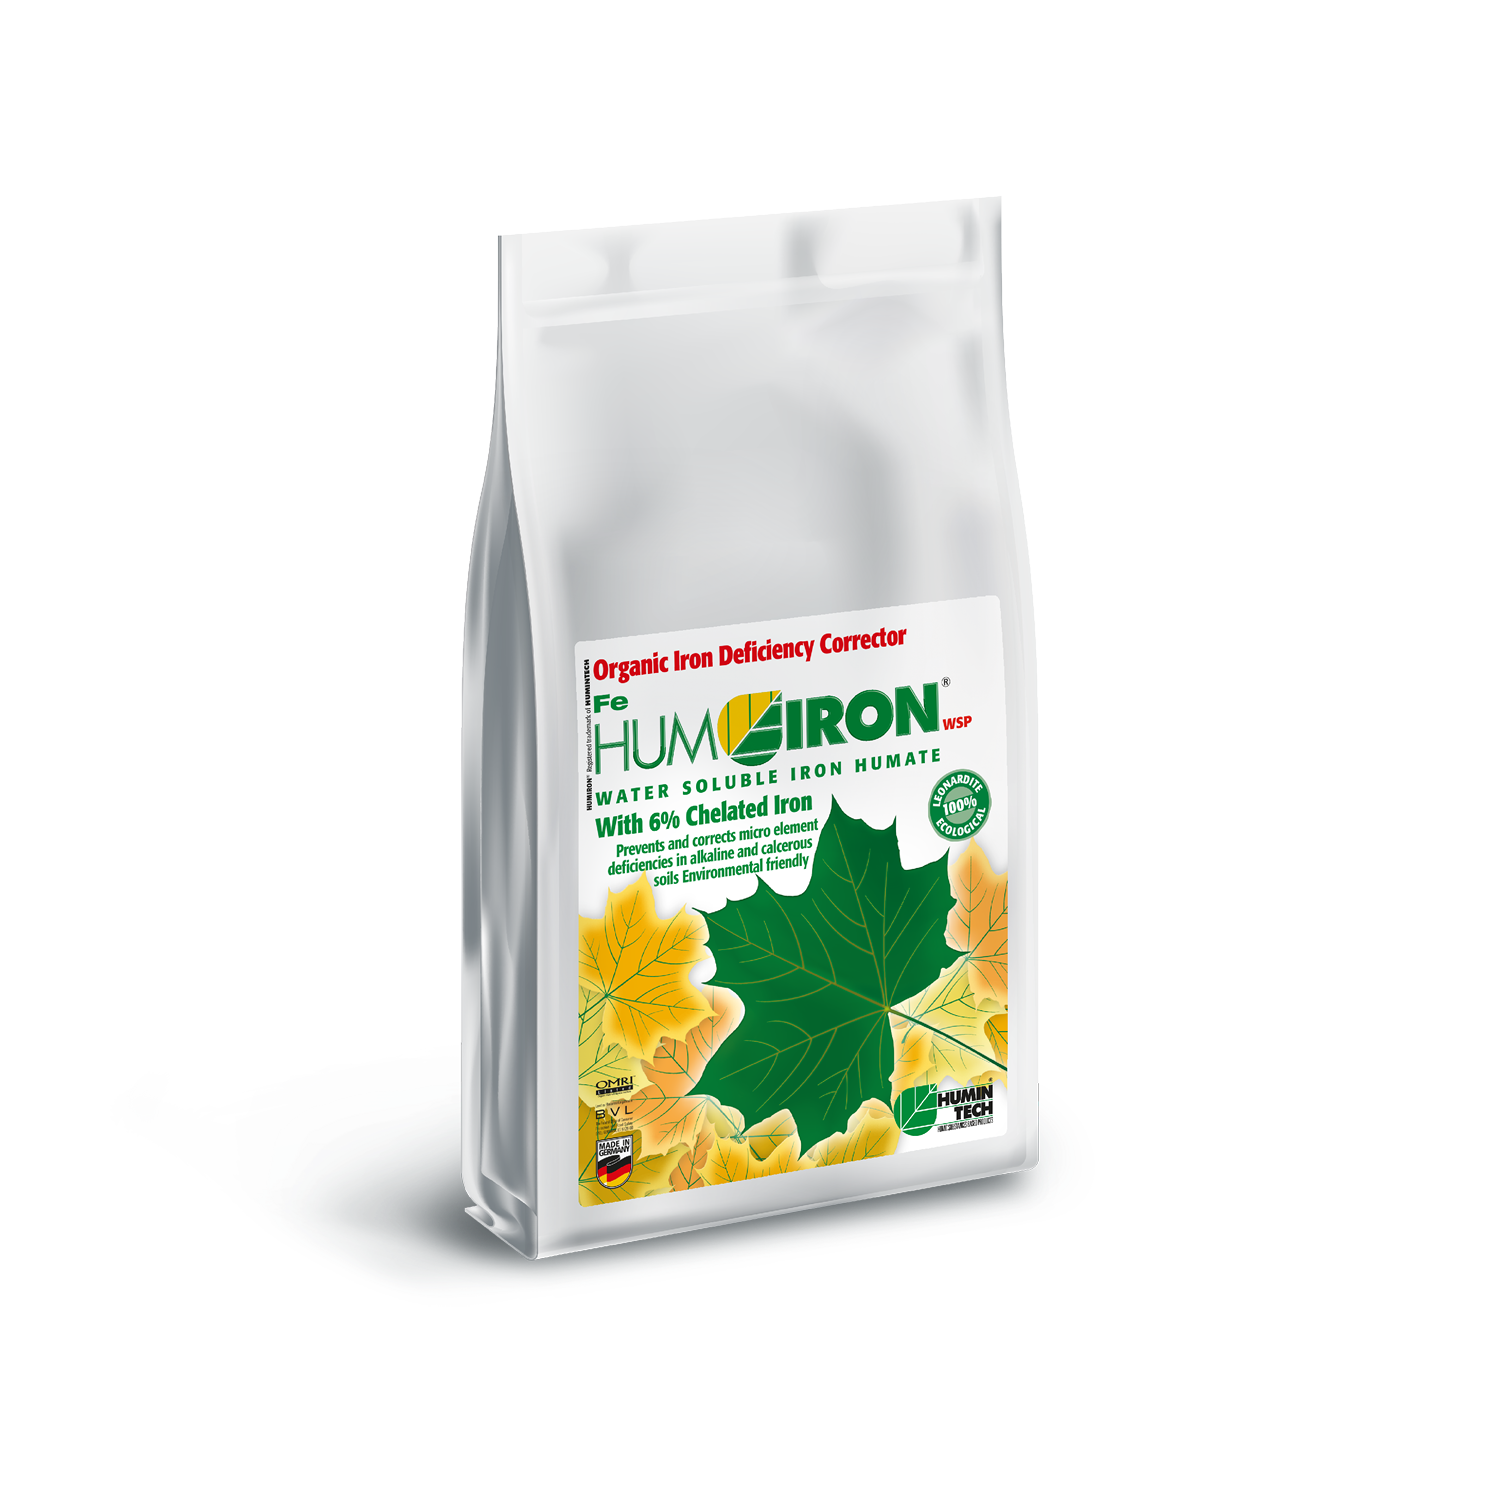 HUMIRON Fe WSP Organic Iron Deficiency Corrector Iron Humate with 6% Chelated and Complexed Iron bag